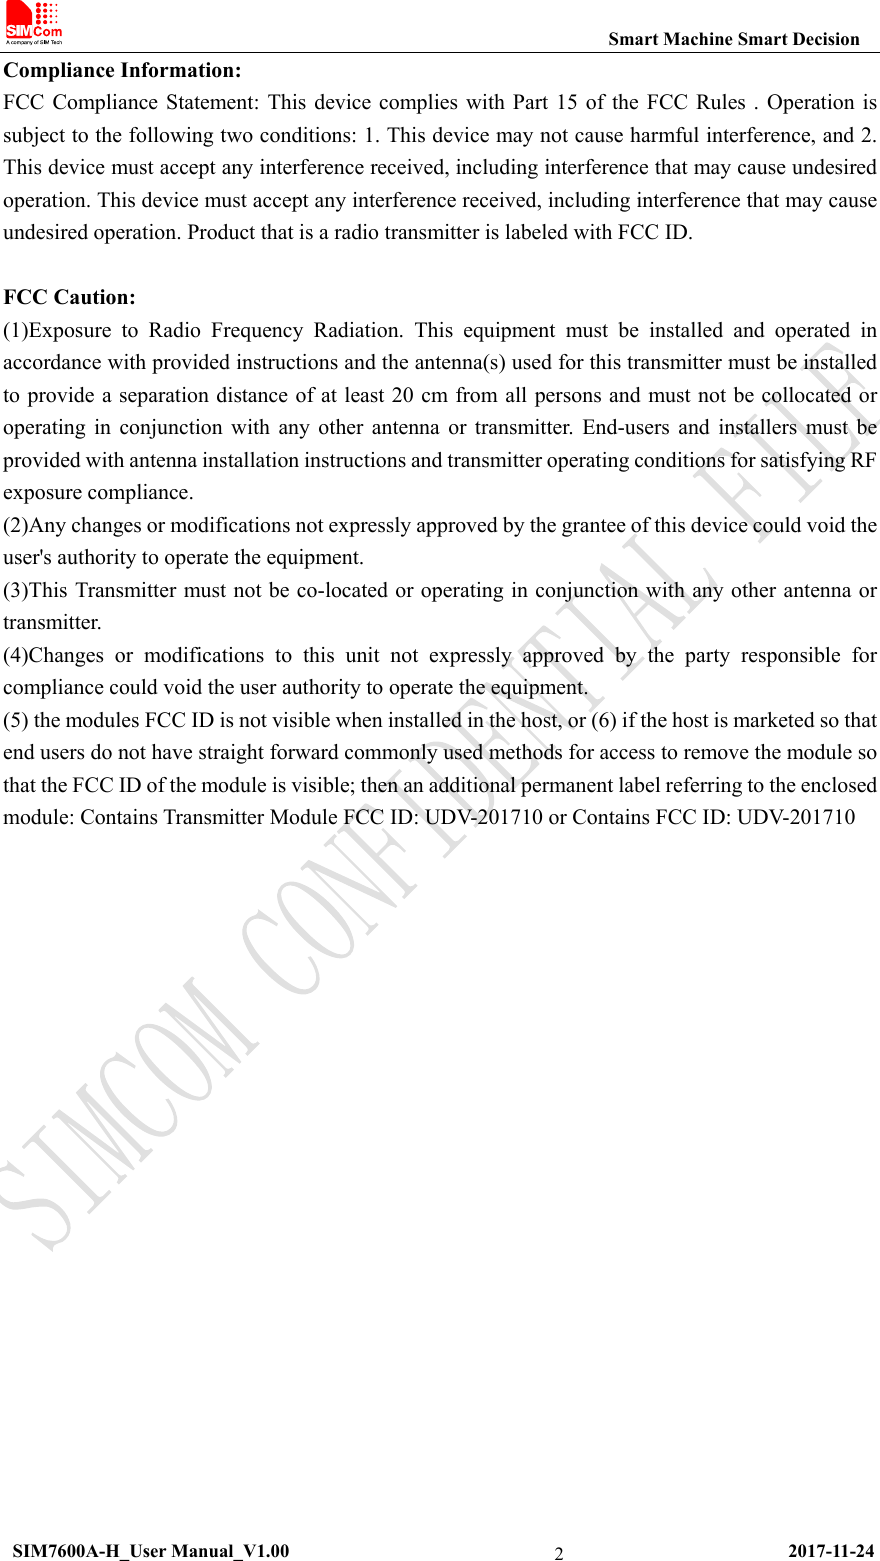                                                           Smart Machine Smart Decision  SIM7600A-H_User Manual_V1.00                                                     2017-11-24 2Compliance Information: FCC Compliance Statement: This device complies with Part 15 of the FCC Rules . Operation is subject to the following two conditions: 1. This device may not cause harmful interference, and 2. This device must accept any interference received, including interference that may cause undesired operation. This device must accept any interference received, including interference that may cause undesired operation. Product that is a radio transmitter is labeled with FCC ID.    FCC Caution:   (1)Exposure to Radio Frequency Radiation. This equipment must be installed and operated in accordance with provided instructions and the antenna(s) used for this transmitter must be installed to provide a separation distance of at least 20 cm from all persons and must not be collocated or operating in conjunction with any other antenna or transmitter. End-users and installers must be provided with antenna installation instructions and transmitter operating conditions for satisfying RF exposure compliance.   (2)Any changes or modifications not expressly approved by the grantee of this device could void the user&apos;s authority to operate the equipment.   (3)This Transmitter must not be co-located or operating in conjunction with any other antenna or transmitter.  (4)Changes or modifications to this unit not expressly approved by the party responsible for compliance could void the user authority to operate the equipment.   (5) the modules FCC ID is not visible when installed in the host, or (6) if the host is marketed so that end users do not have straight forward commonly used methods for access to remove the module so that the FCC ID of the module is visible; then an additional permanent label referring to the enclosed module: Contains Transmitter Module FCC ID: UDV-201710 or Contains FCC ID: UDV-201710      